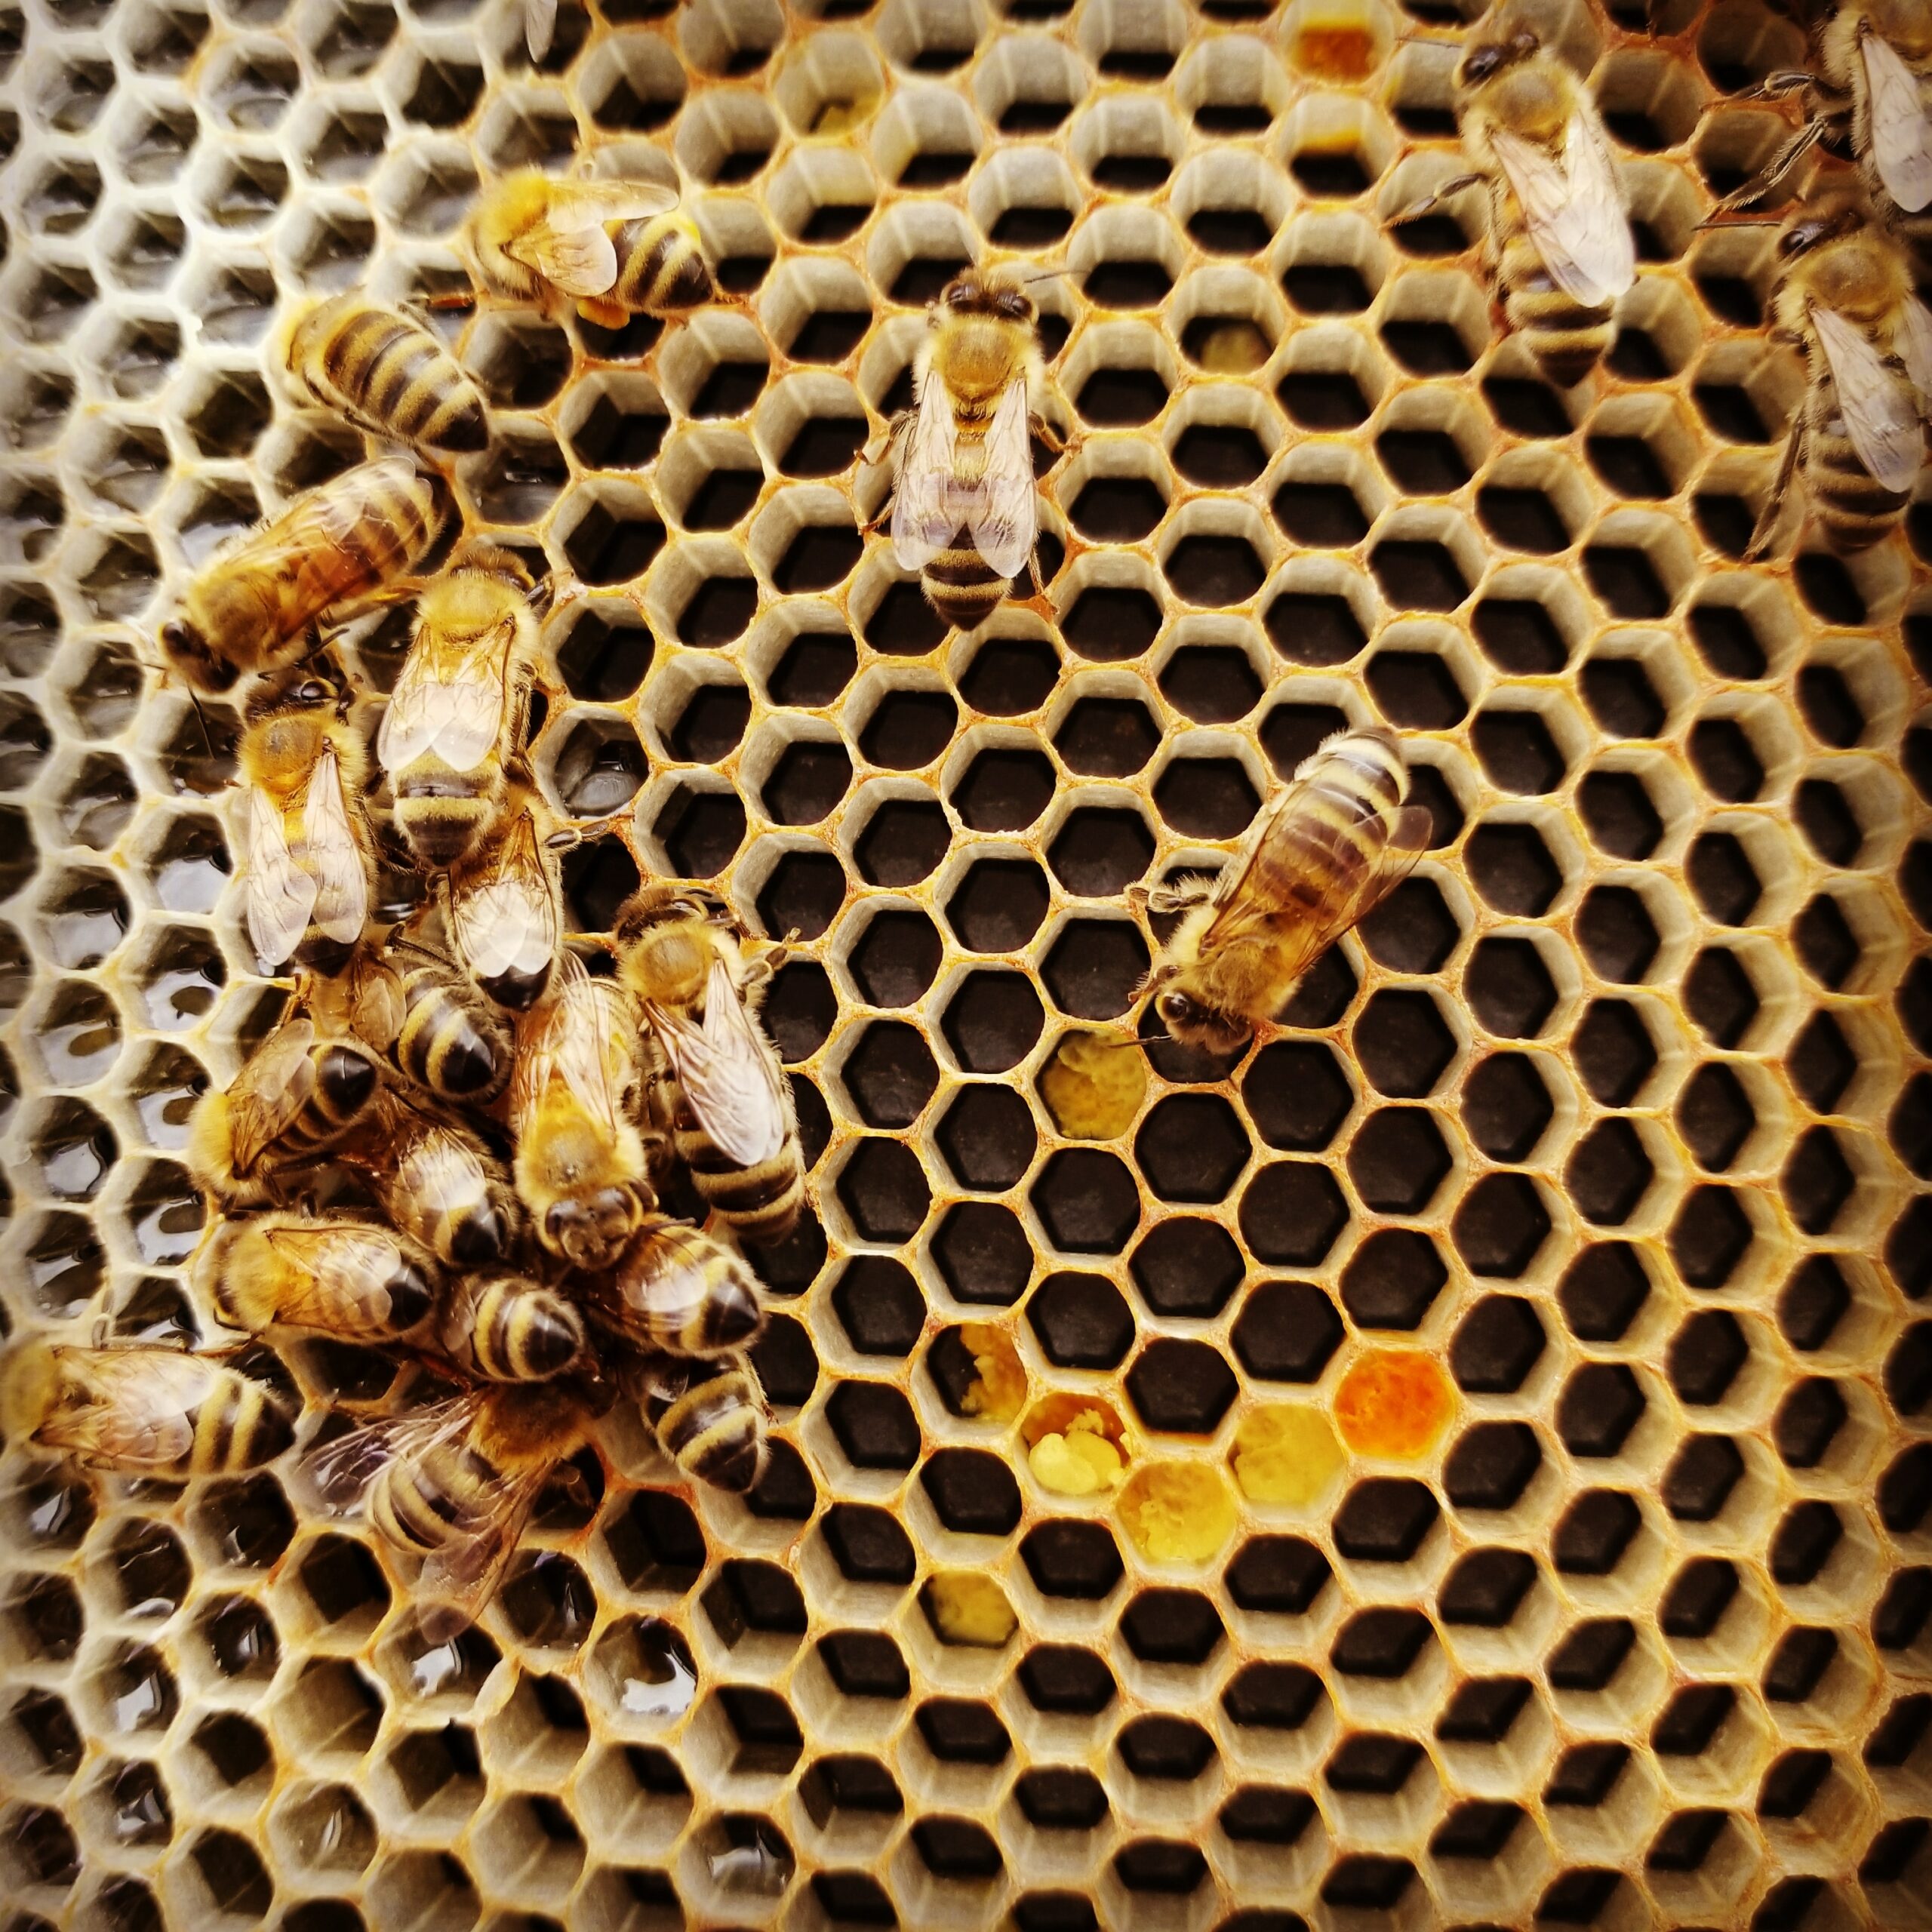 Biomimicry and Bees: What (more) can we learn from honeycombs?